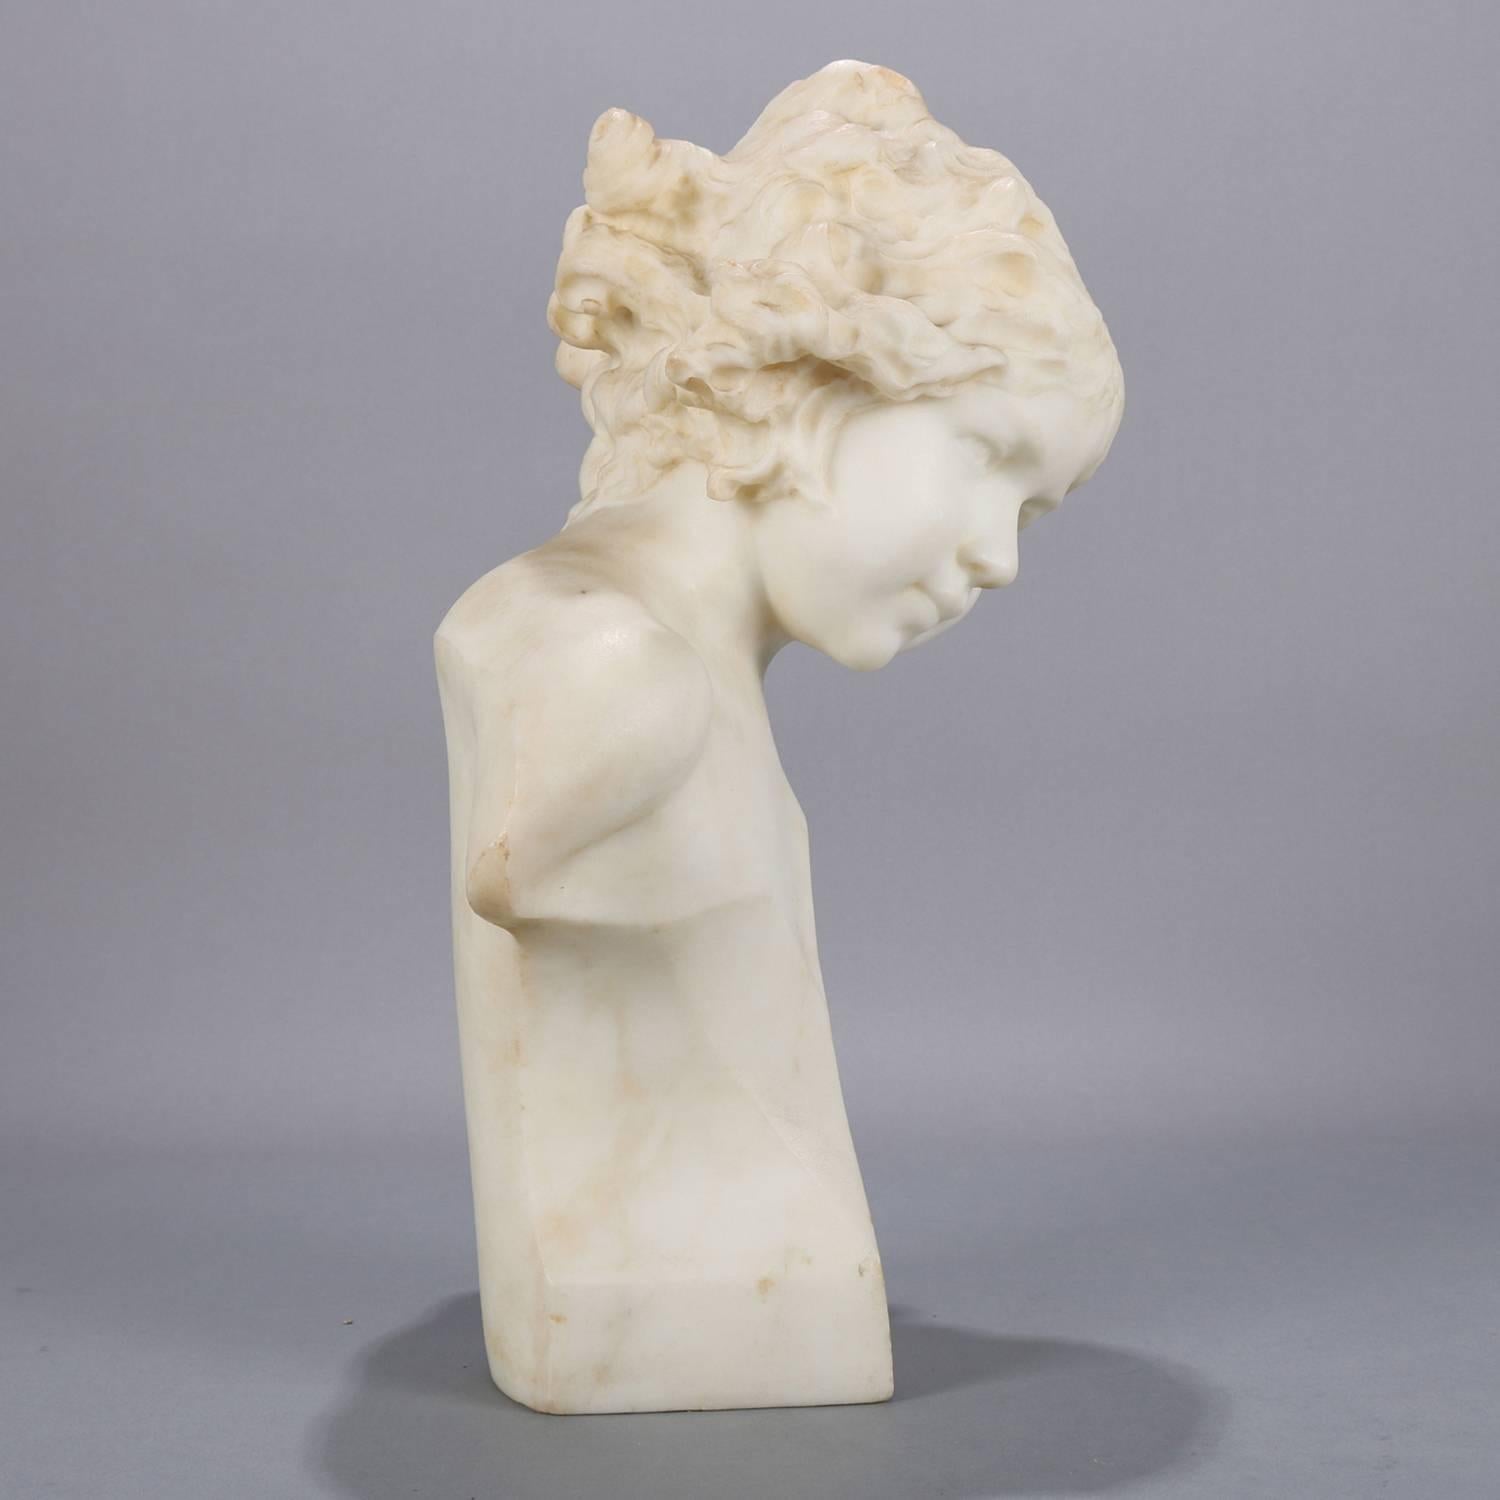 19th Century Antique Italian Figural Carved Marble Portrait Bust Sculpture, Young Girl